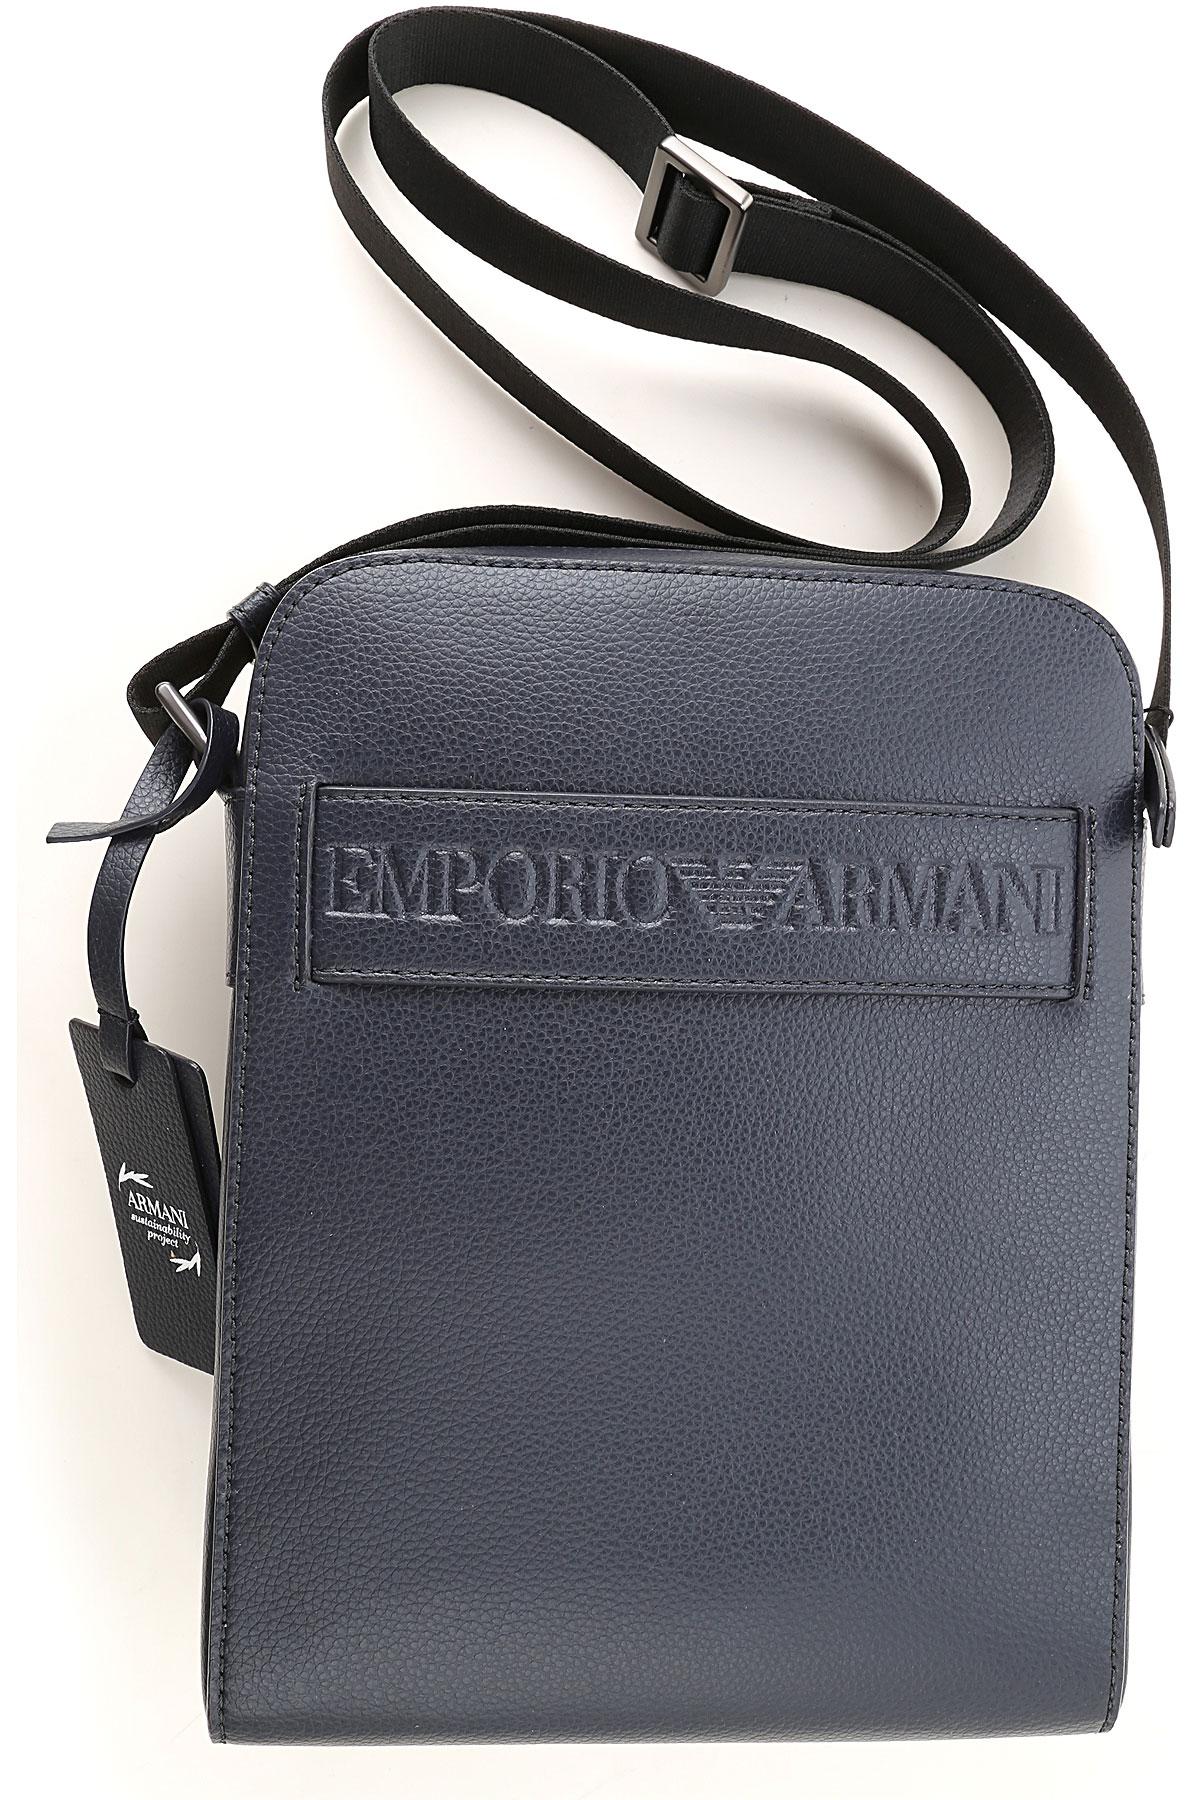 Emporio Armani Leather Shoulder Bags in Blue Navy (Blue) for Men - Lyst